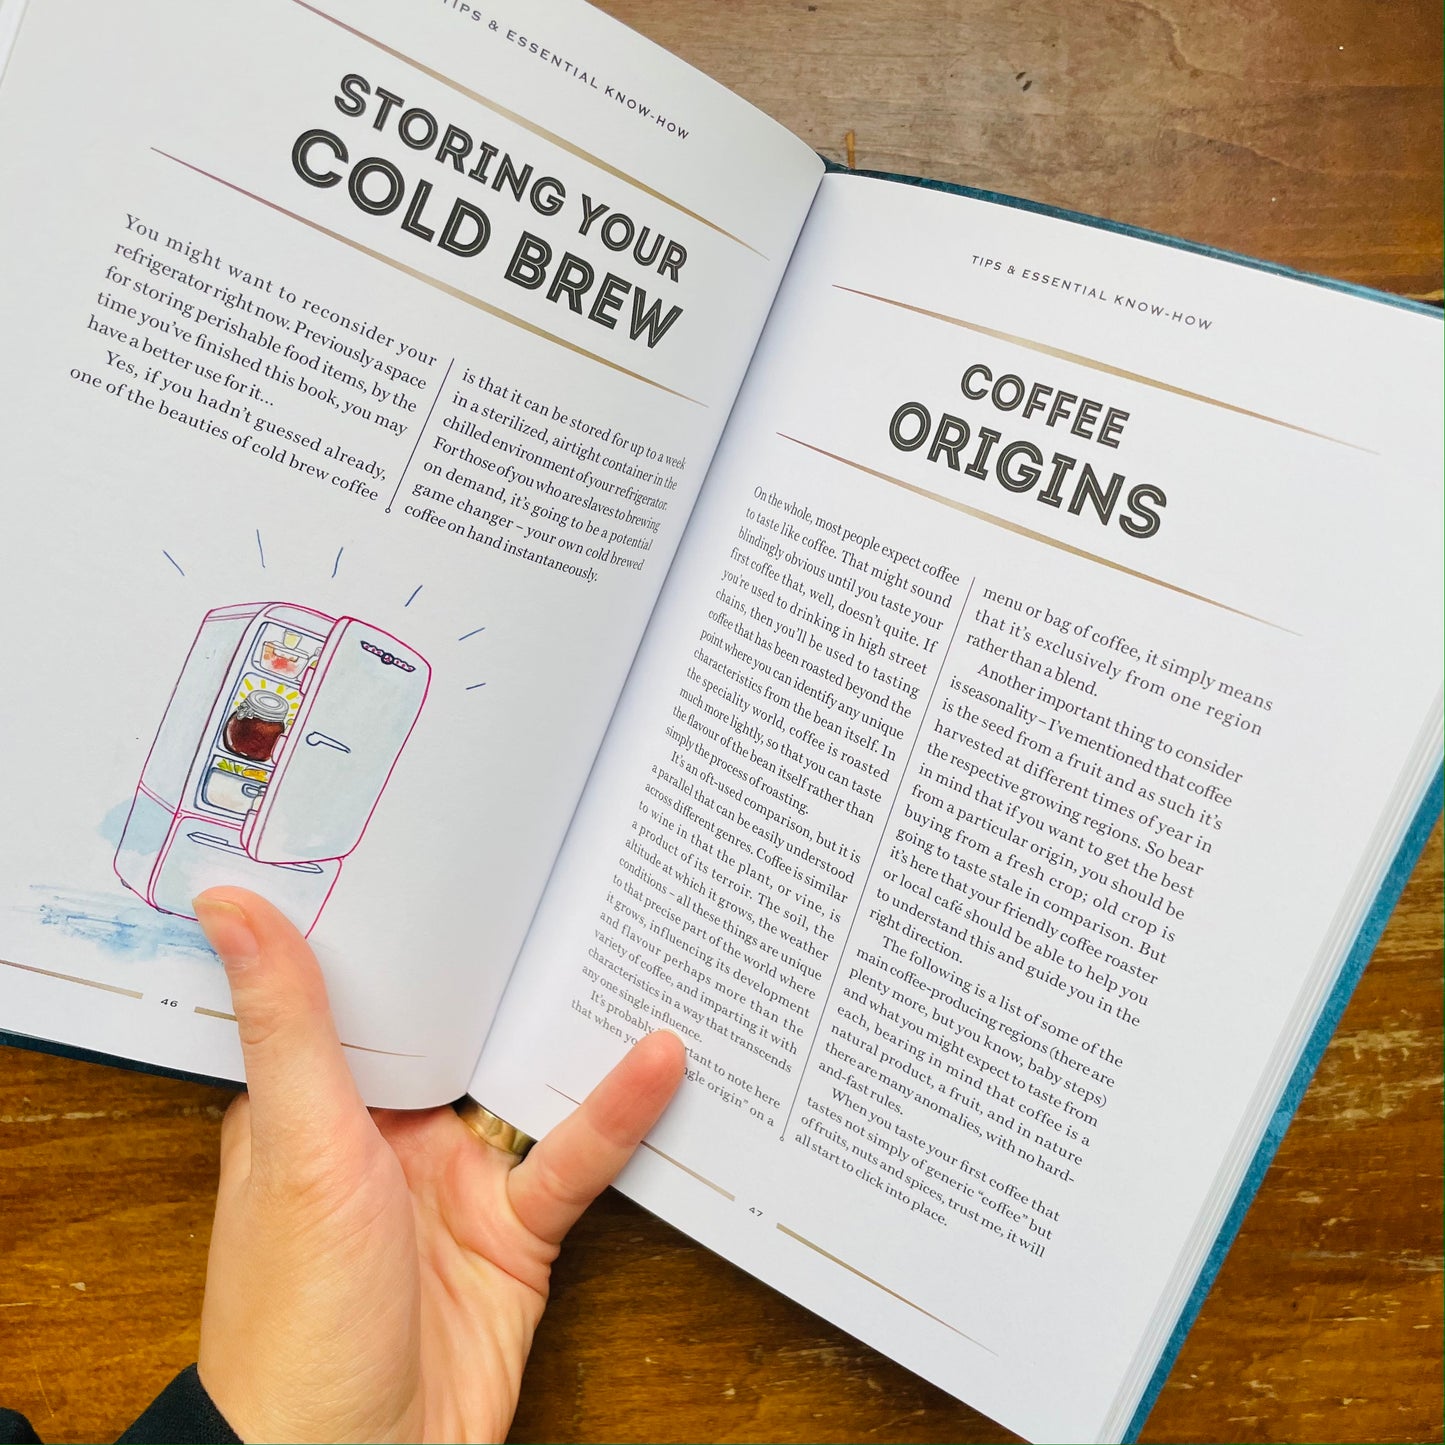 Cold Brew Coffee- Techniques, Recipes & Cocktails for Coffee's Hottest Trends